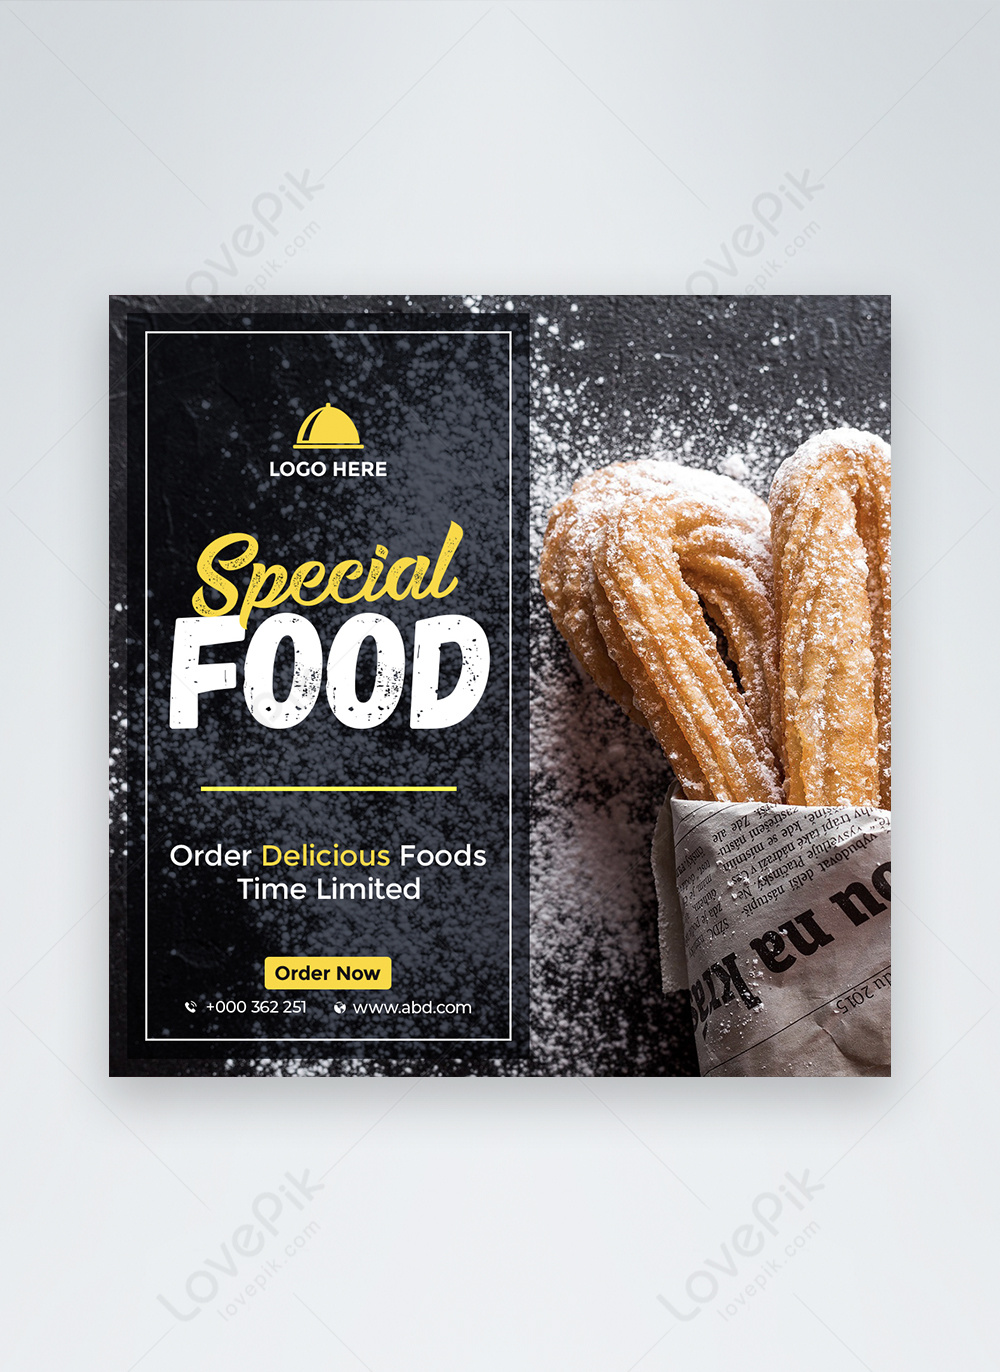 Download Special Food Offer Social Media Ads Post Template Image Picture Free Download 450002880 Lovepik Com PSD Mockup Templates